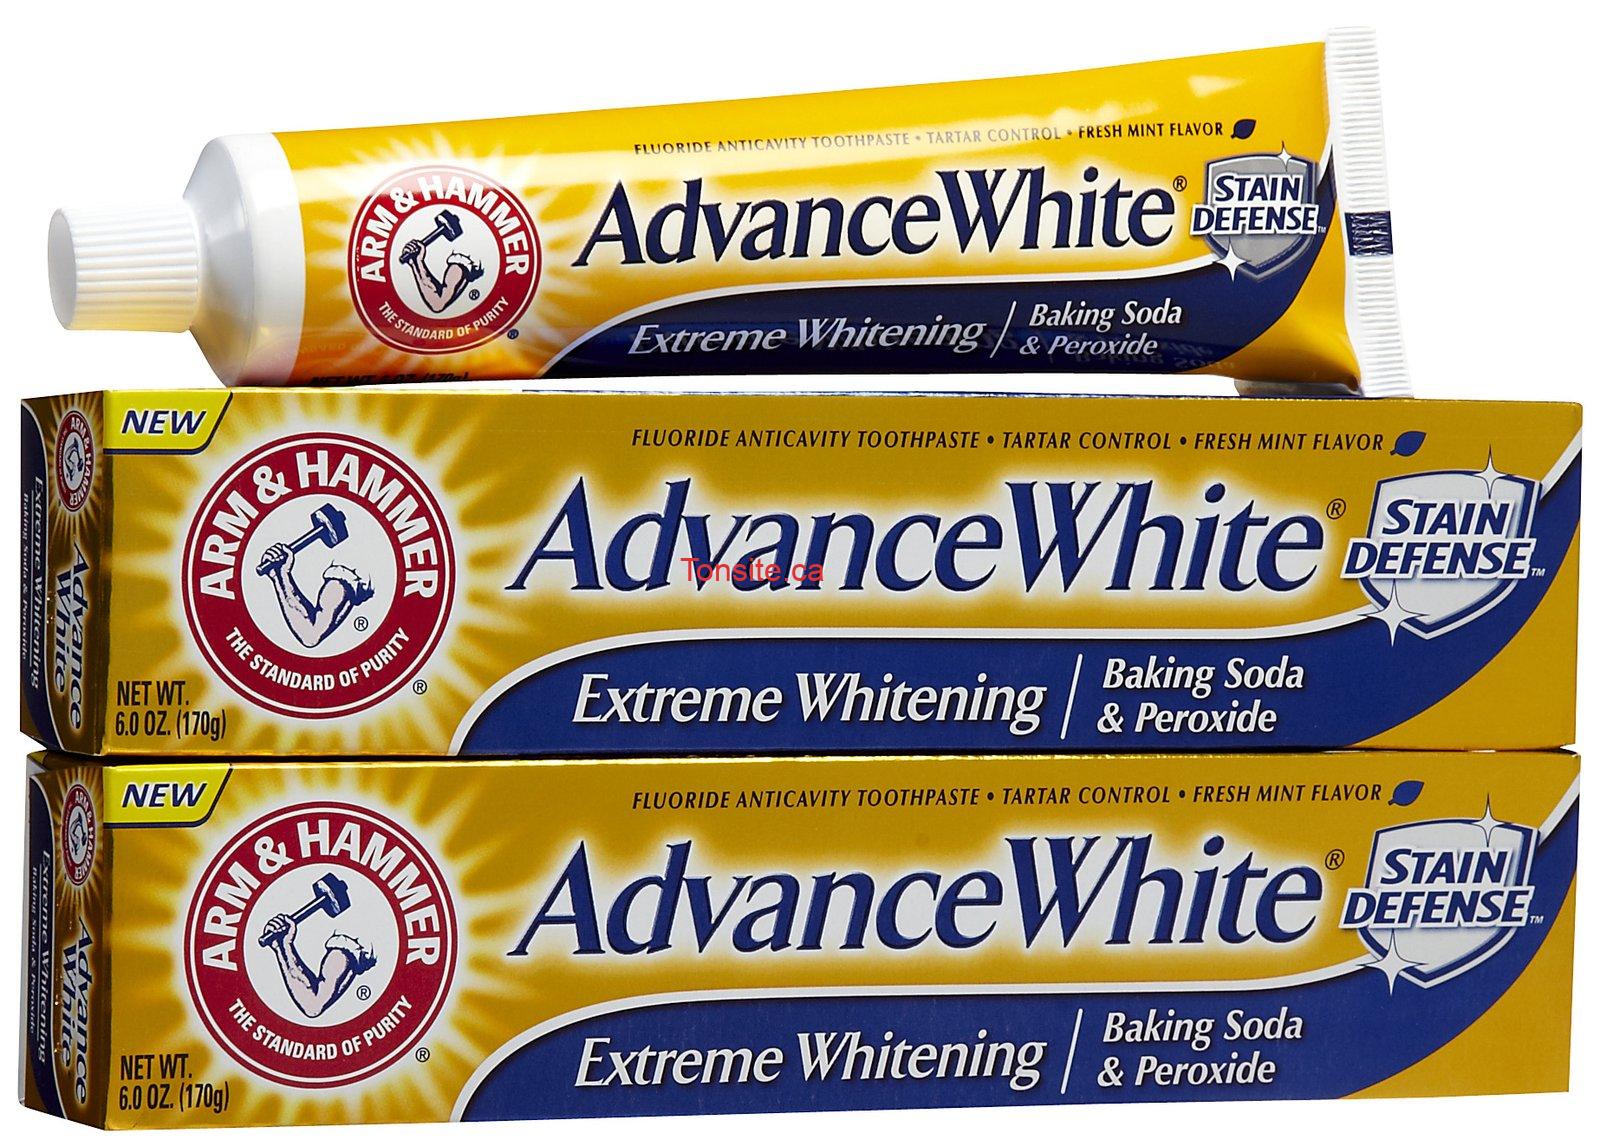 Dentifrice Arm & Hammer à 90¢ coupon!